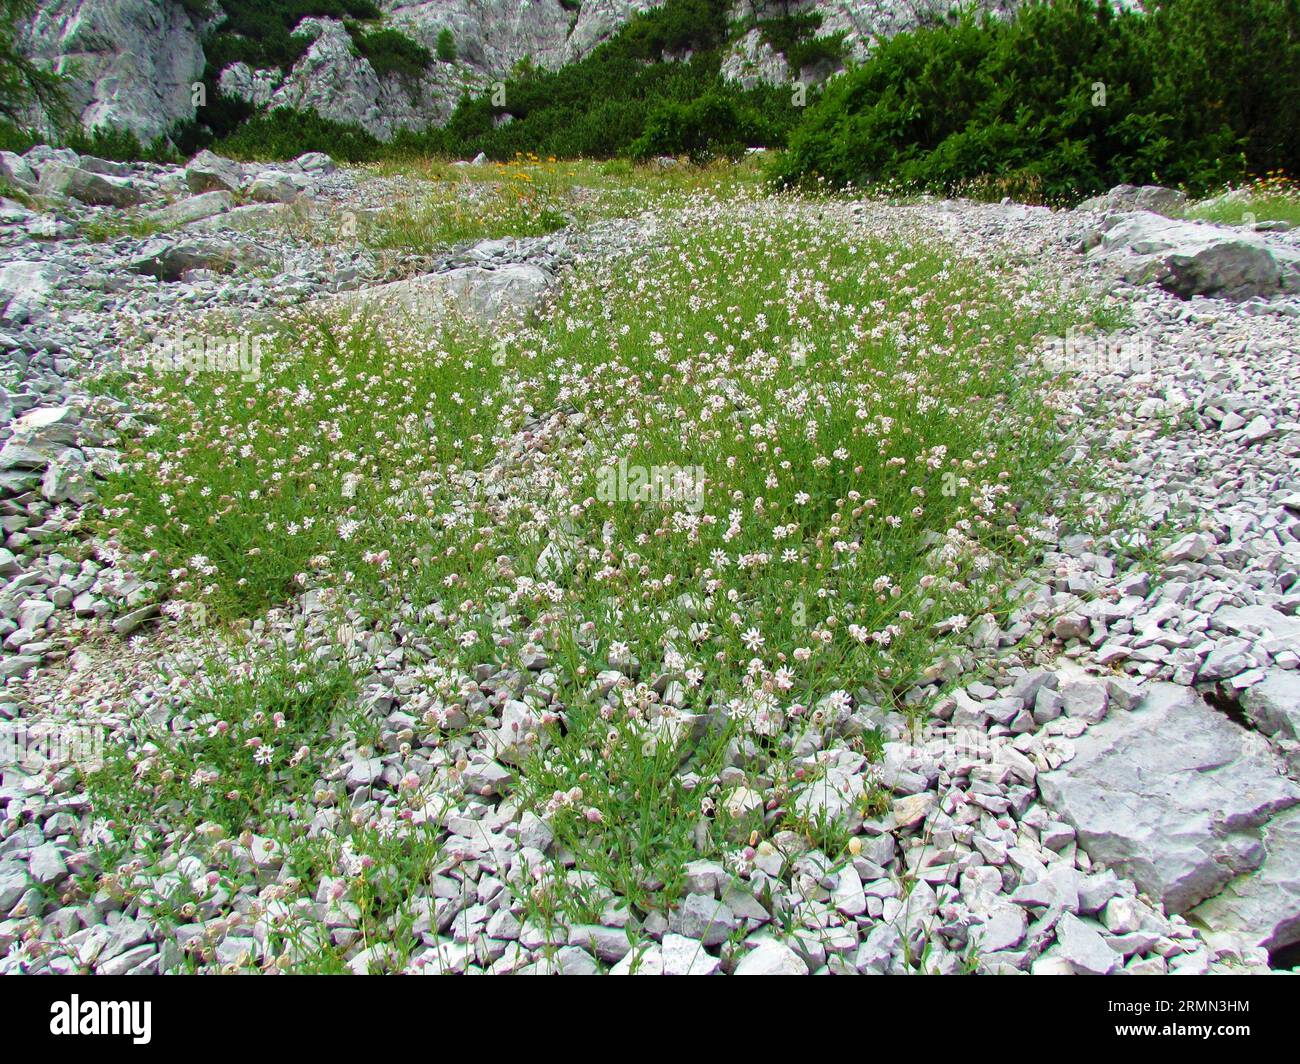 Large patch of bladder campion or maiden stears (Silene vulgaris) flowers in bloom on a mostly rocky slope with some creeping pine in the back in Kara Stock Photo